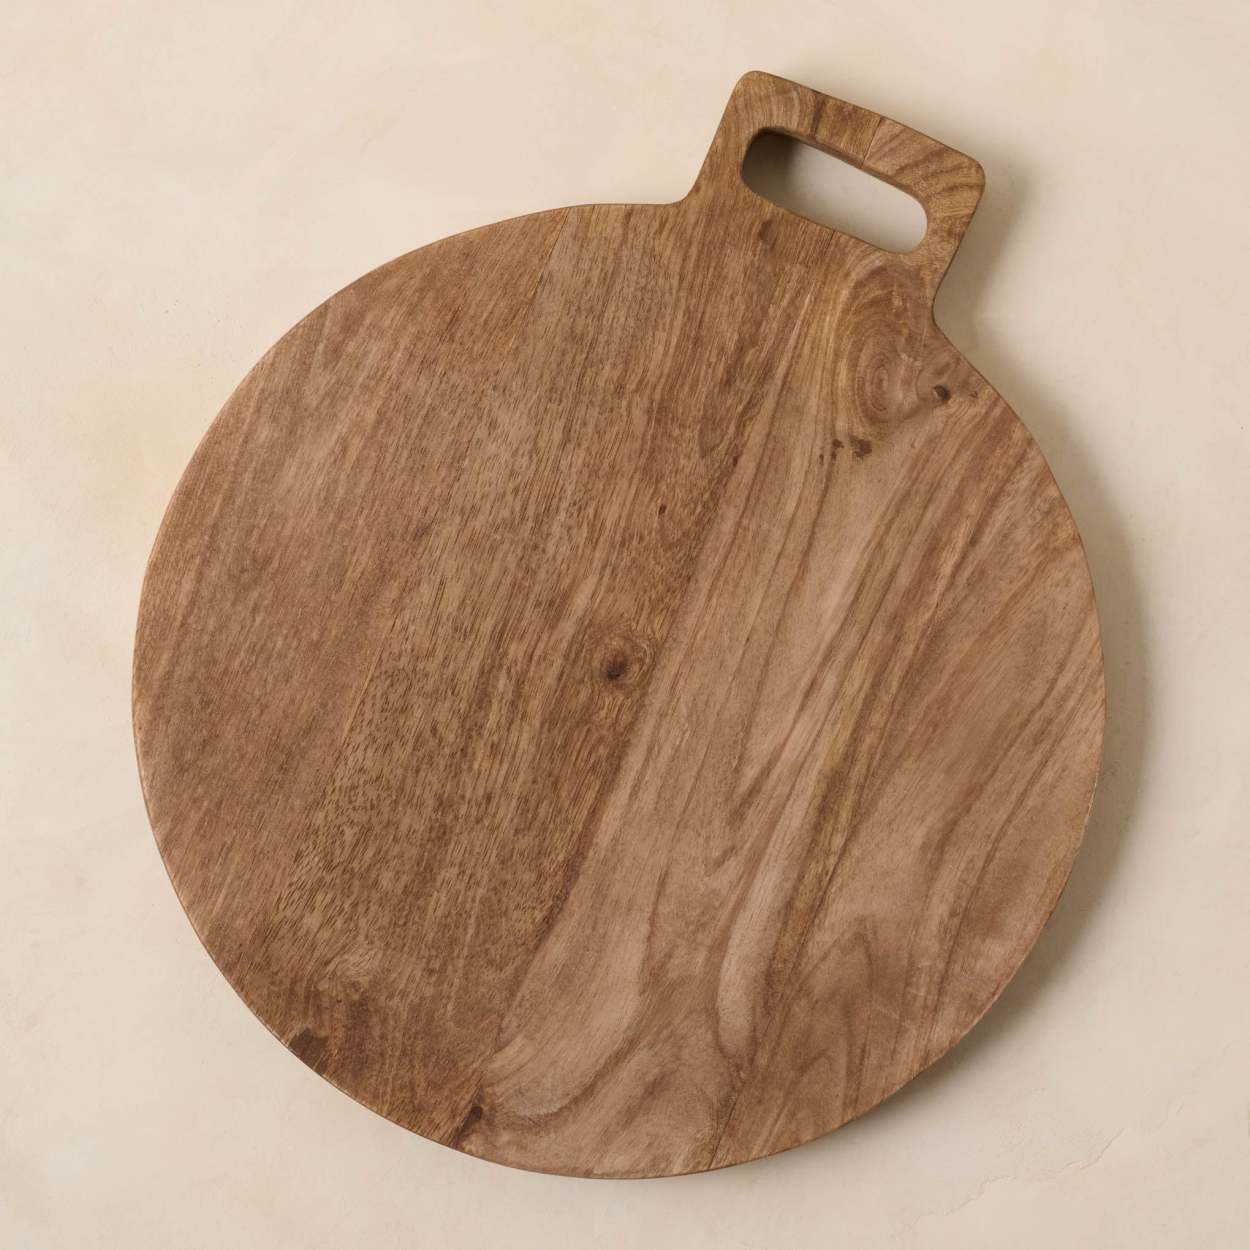 Vintage wooden cutting board on top of black stone kitchen stone